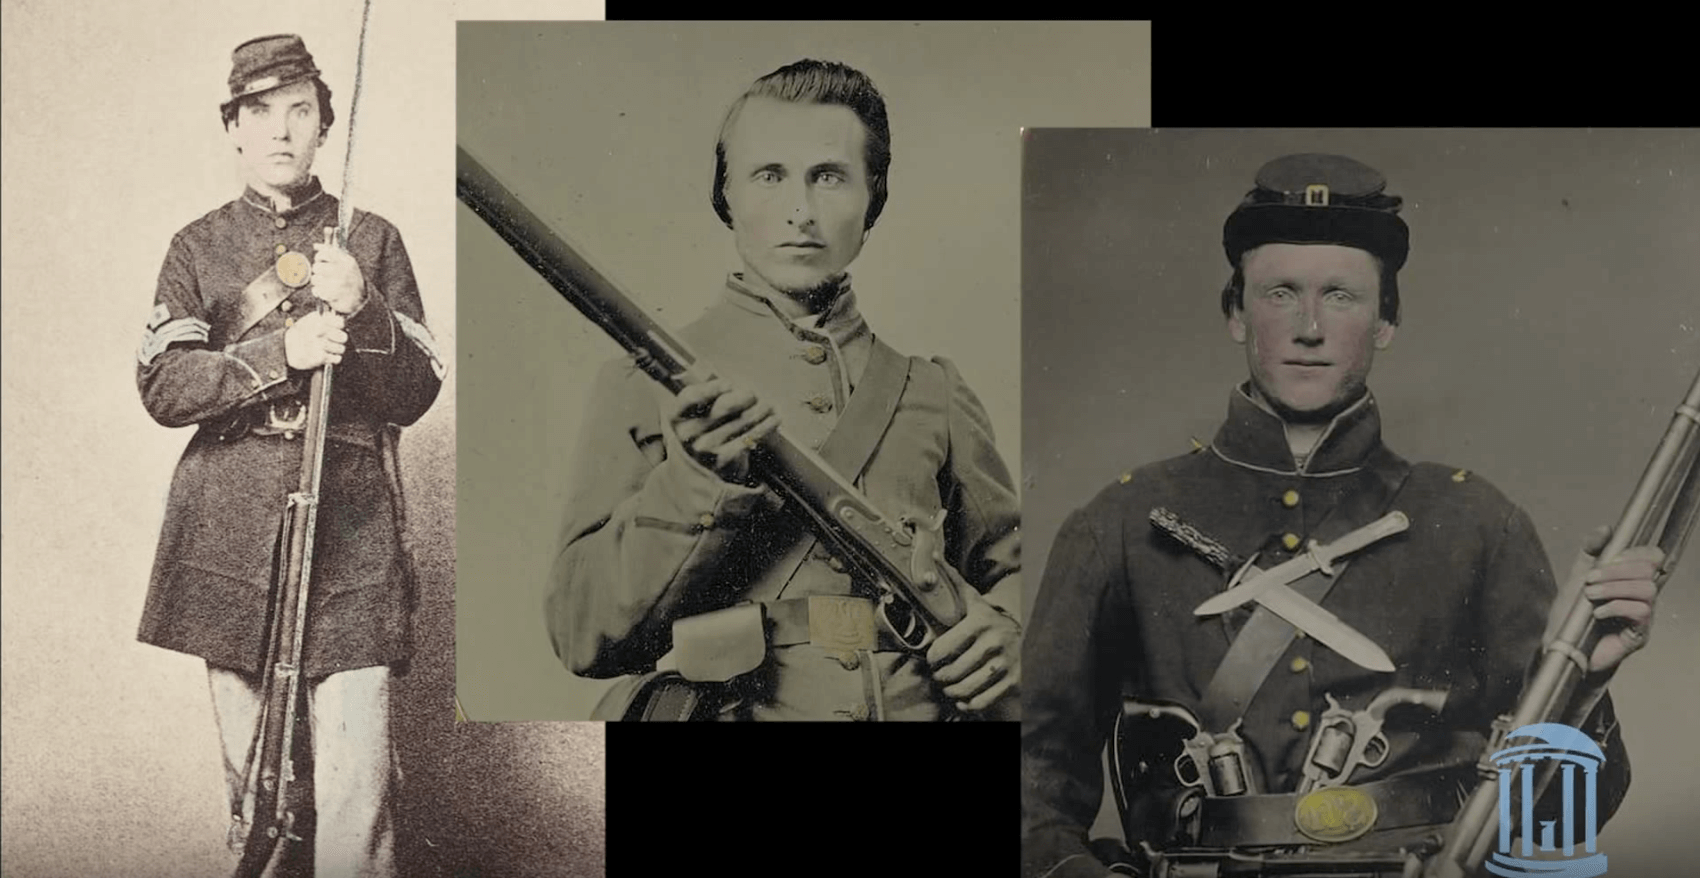 Three archived photos of three Civil War soldiers in uniform.